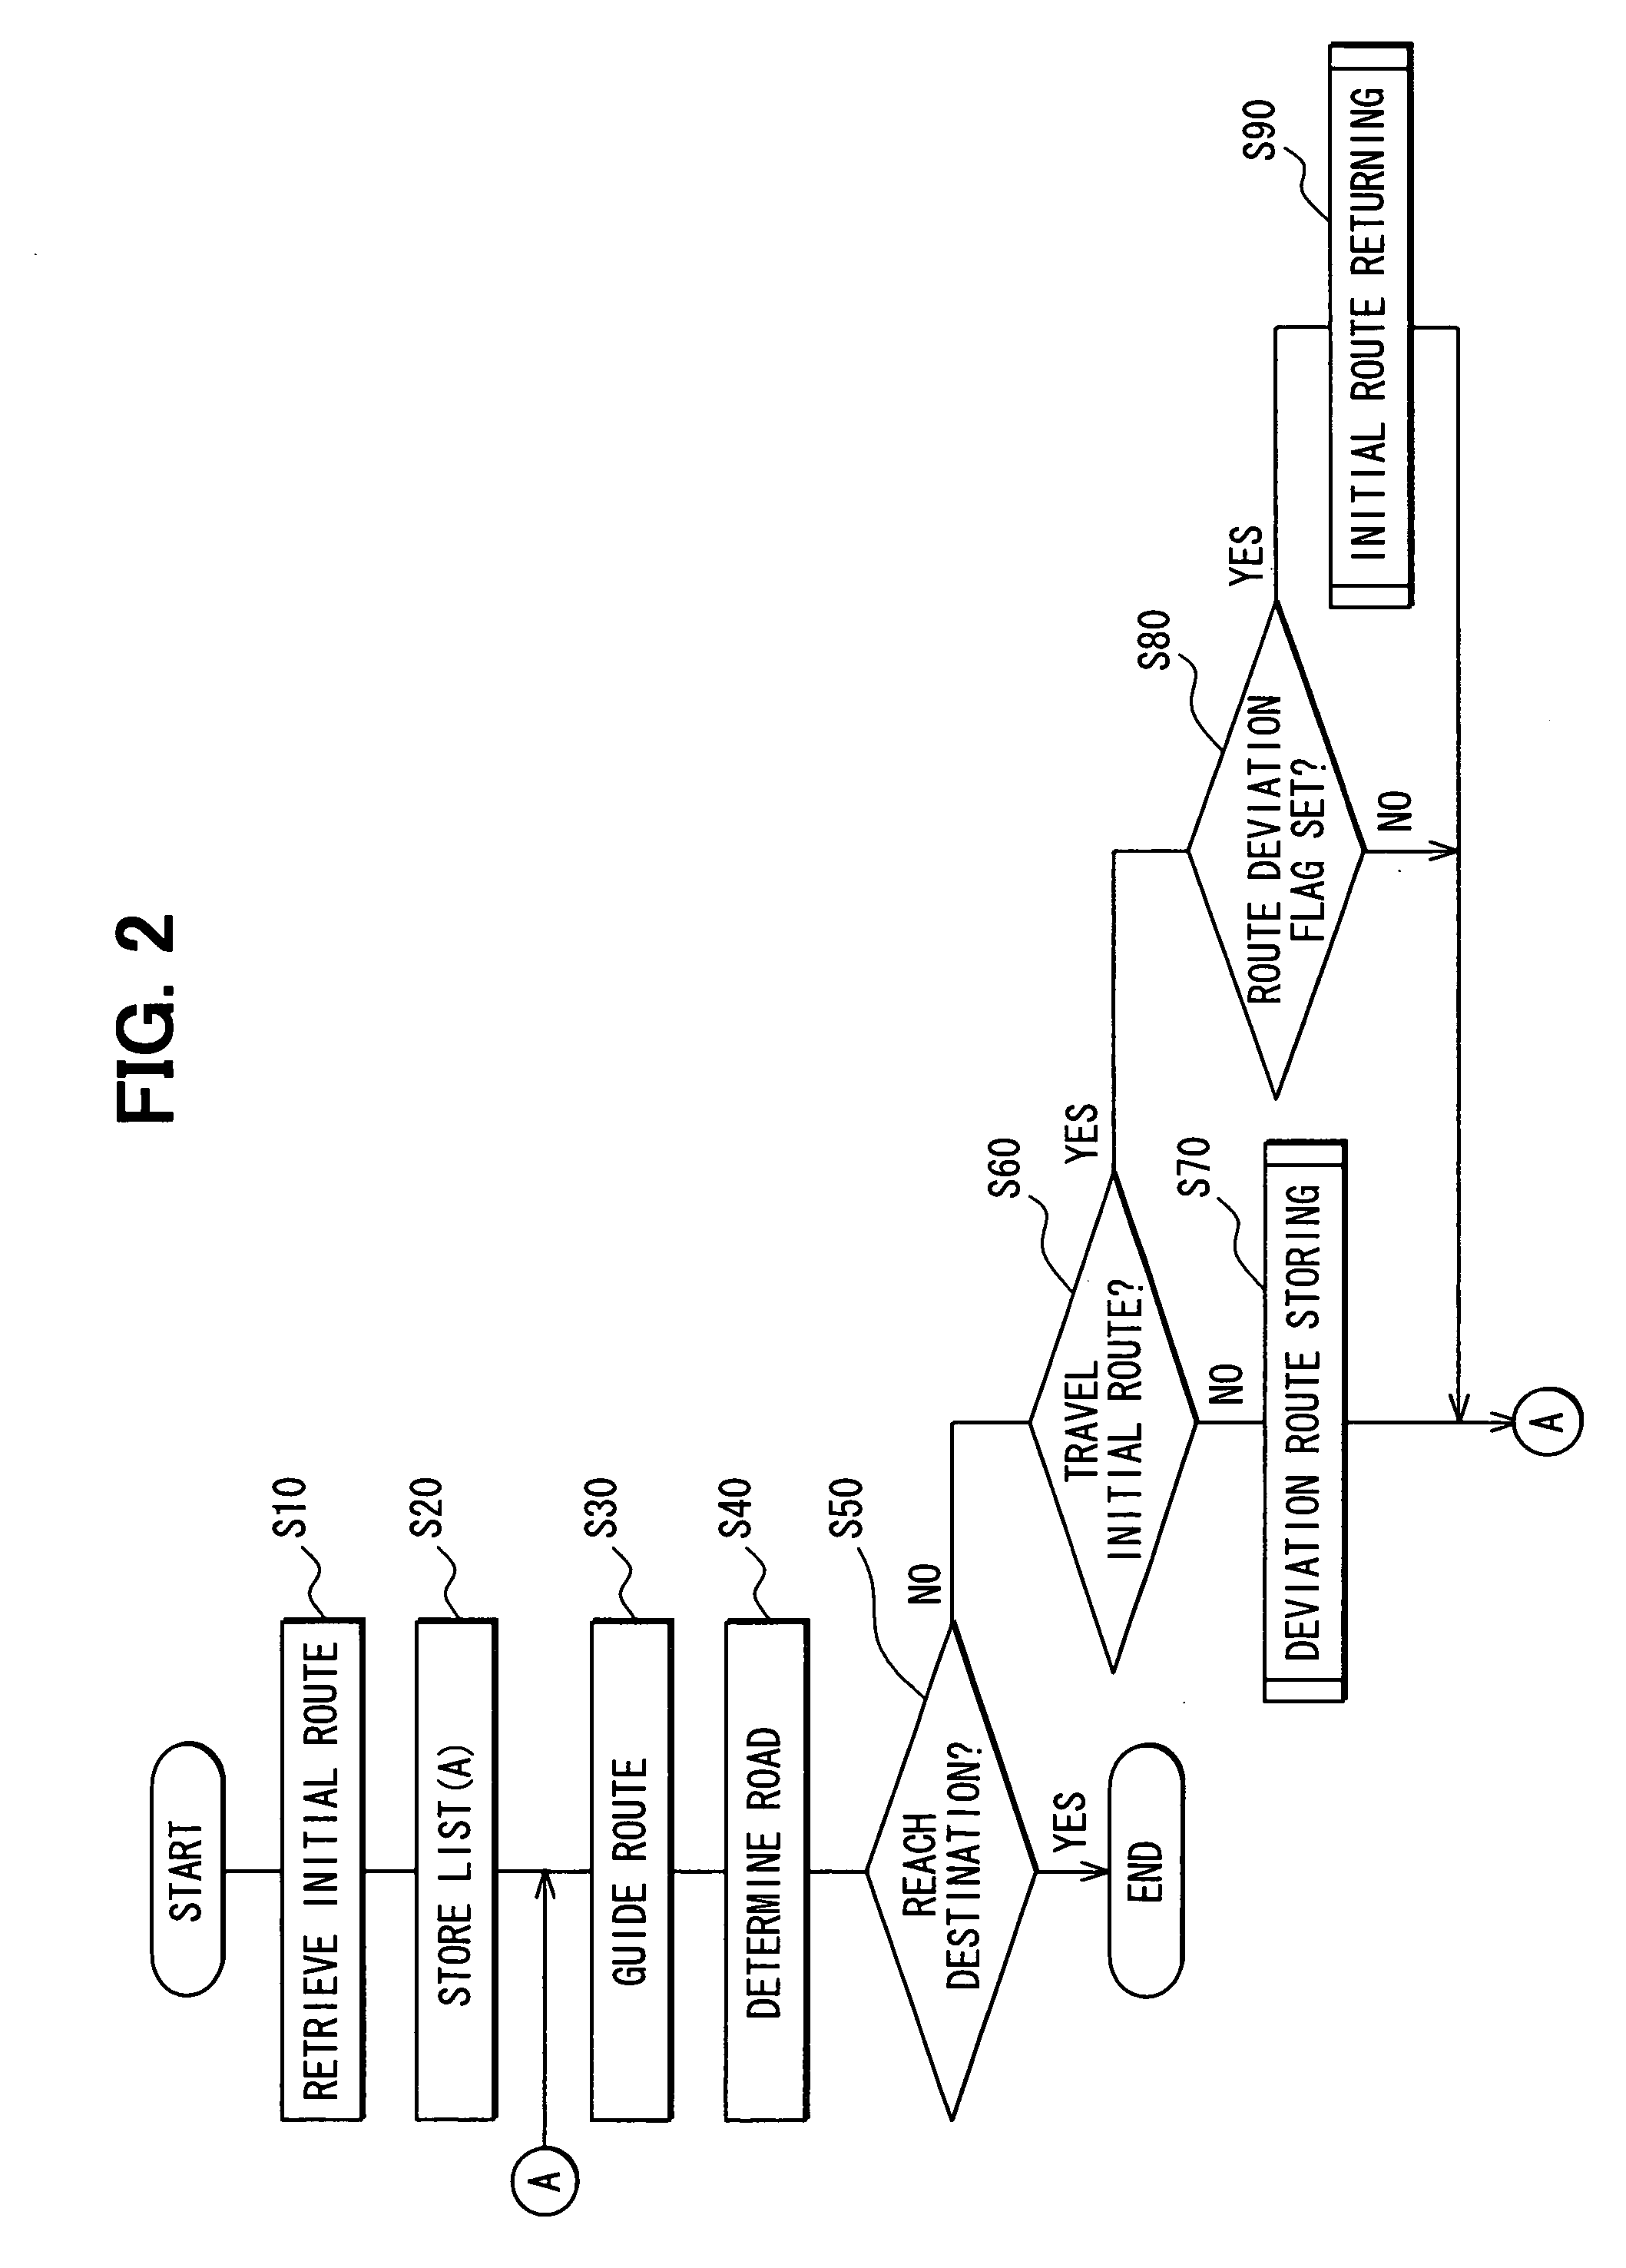 In-vehicle navigation device